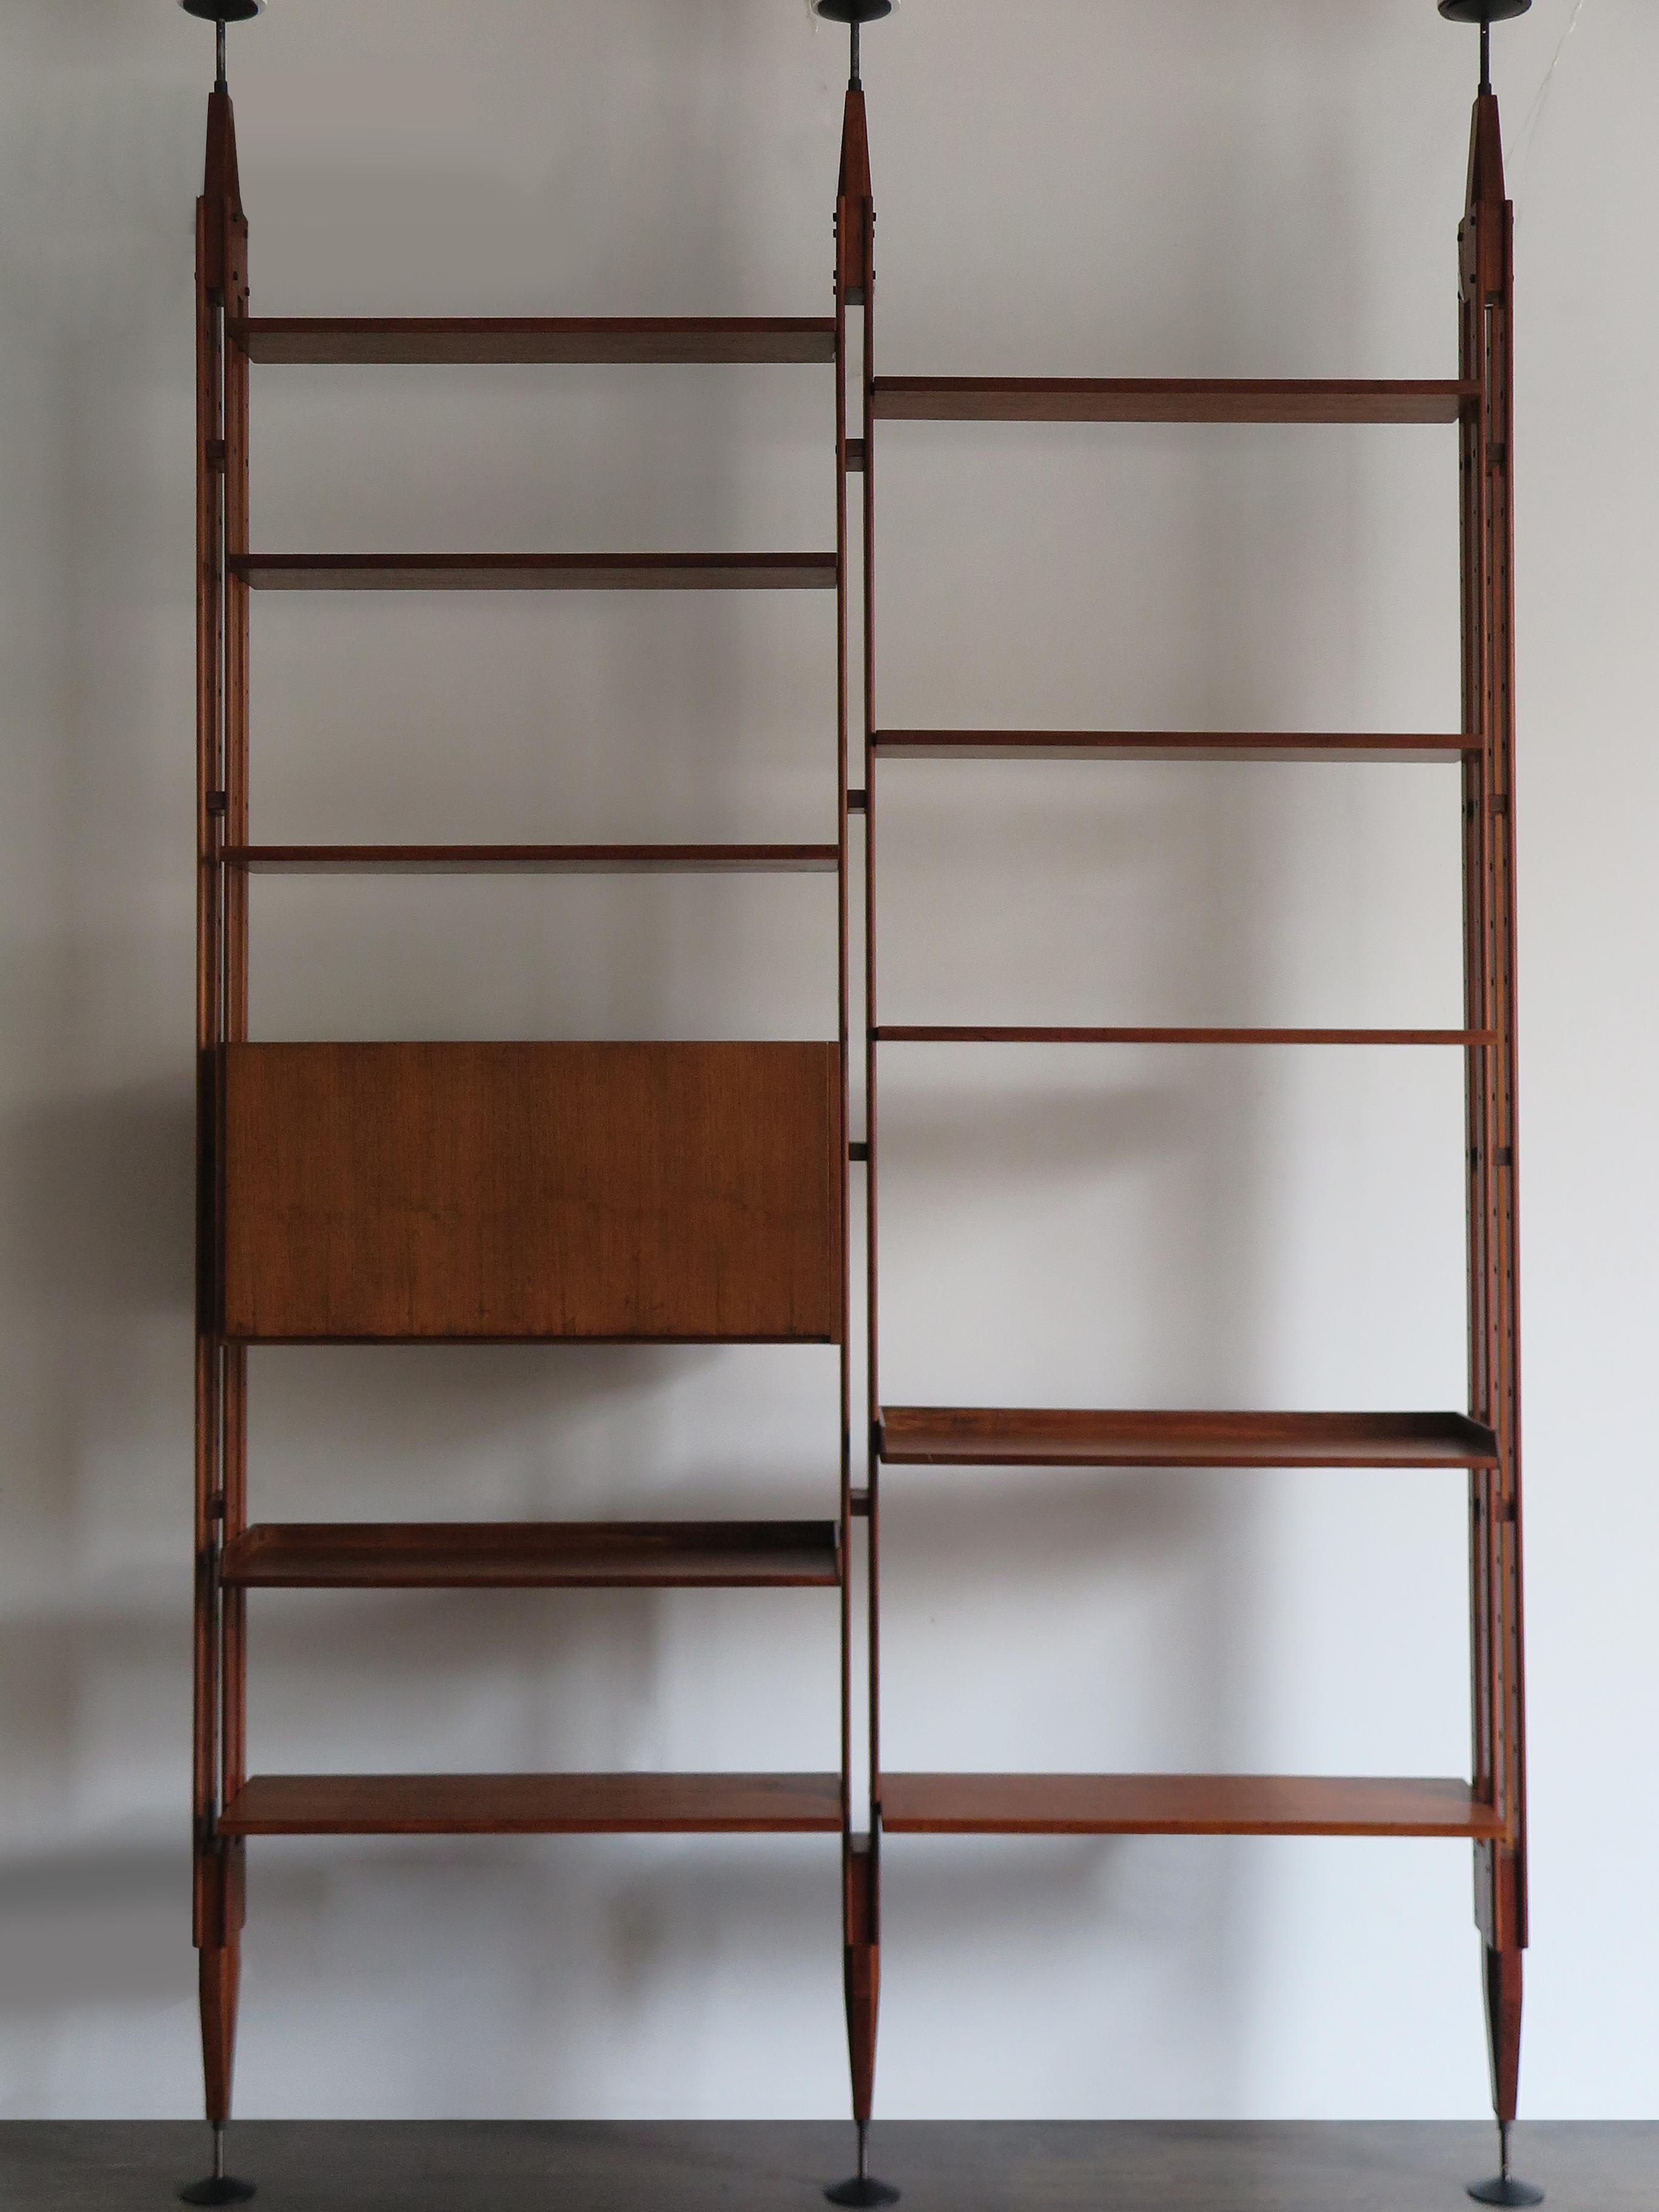 Italian very famous bookcase shelves, adjustable with uprights set on the floor and ceiling, designed by Franco Albini in 1956 for Poggi Pavia, midcentury design.
Shelves and container adjustable in height.
Uprights, containers and shelves made of